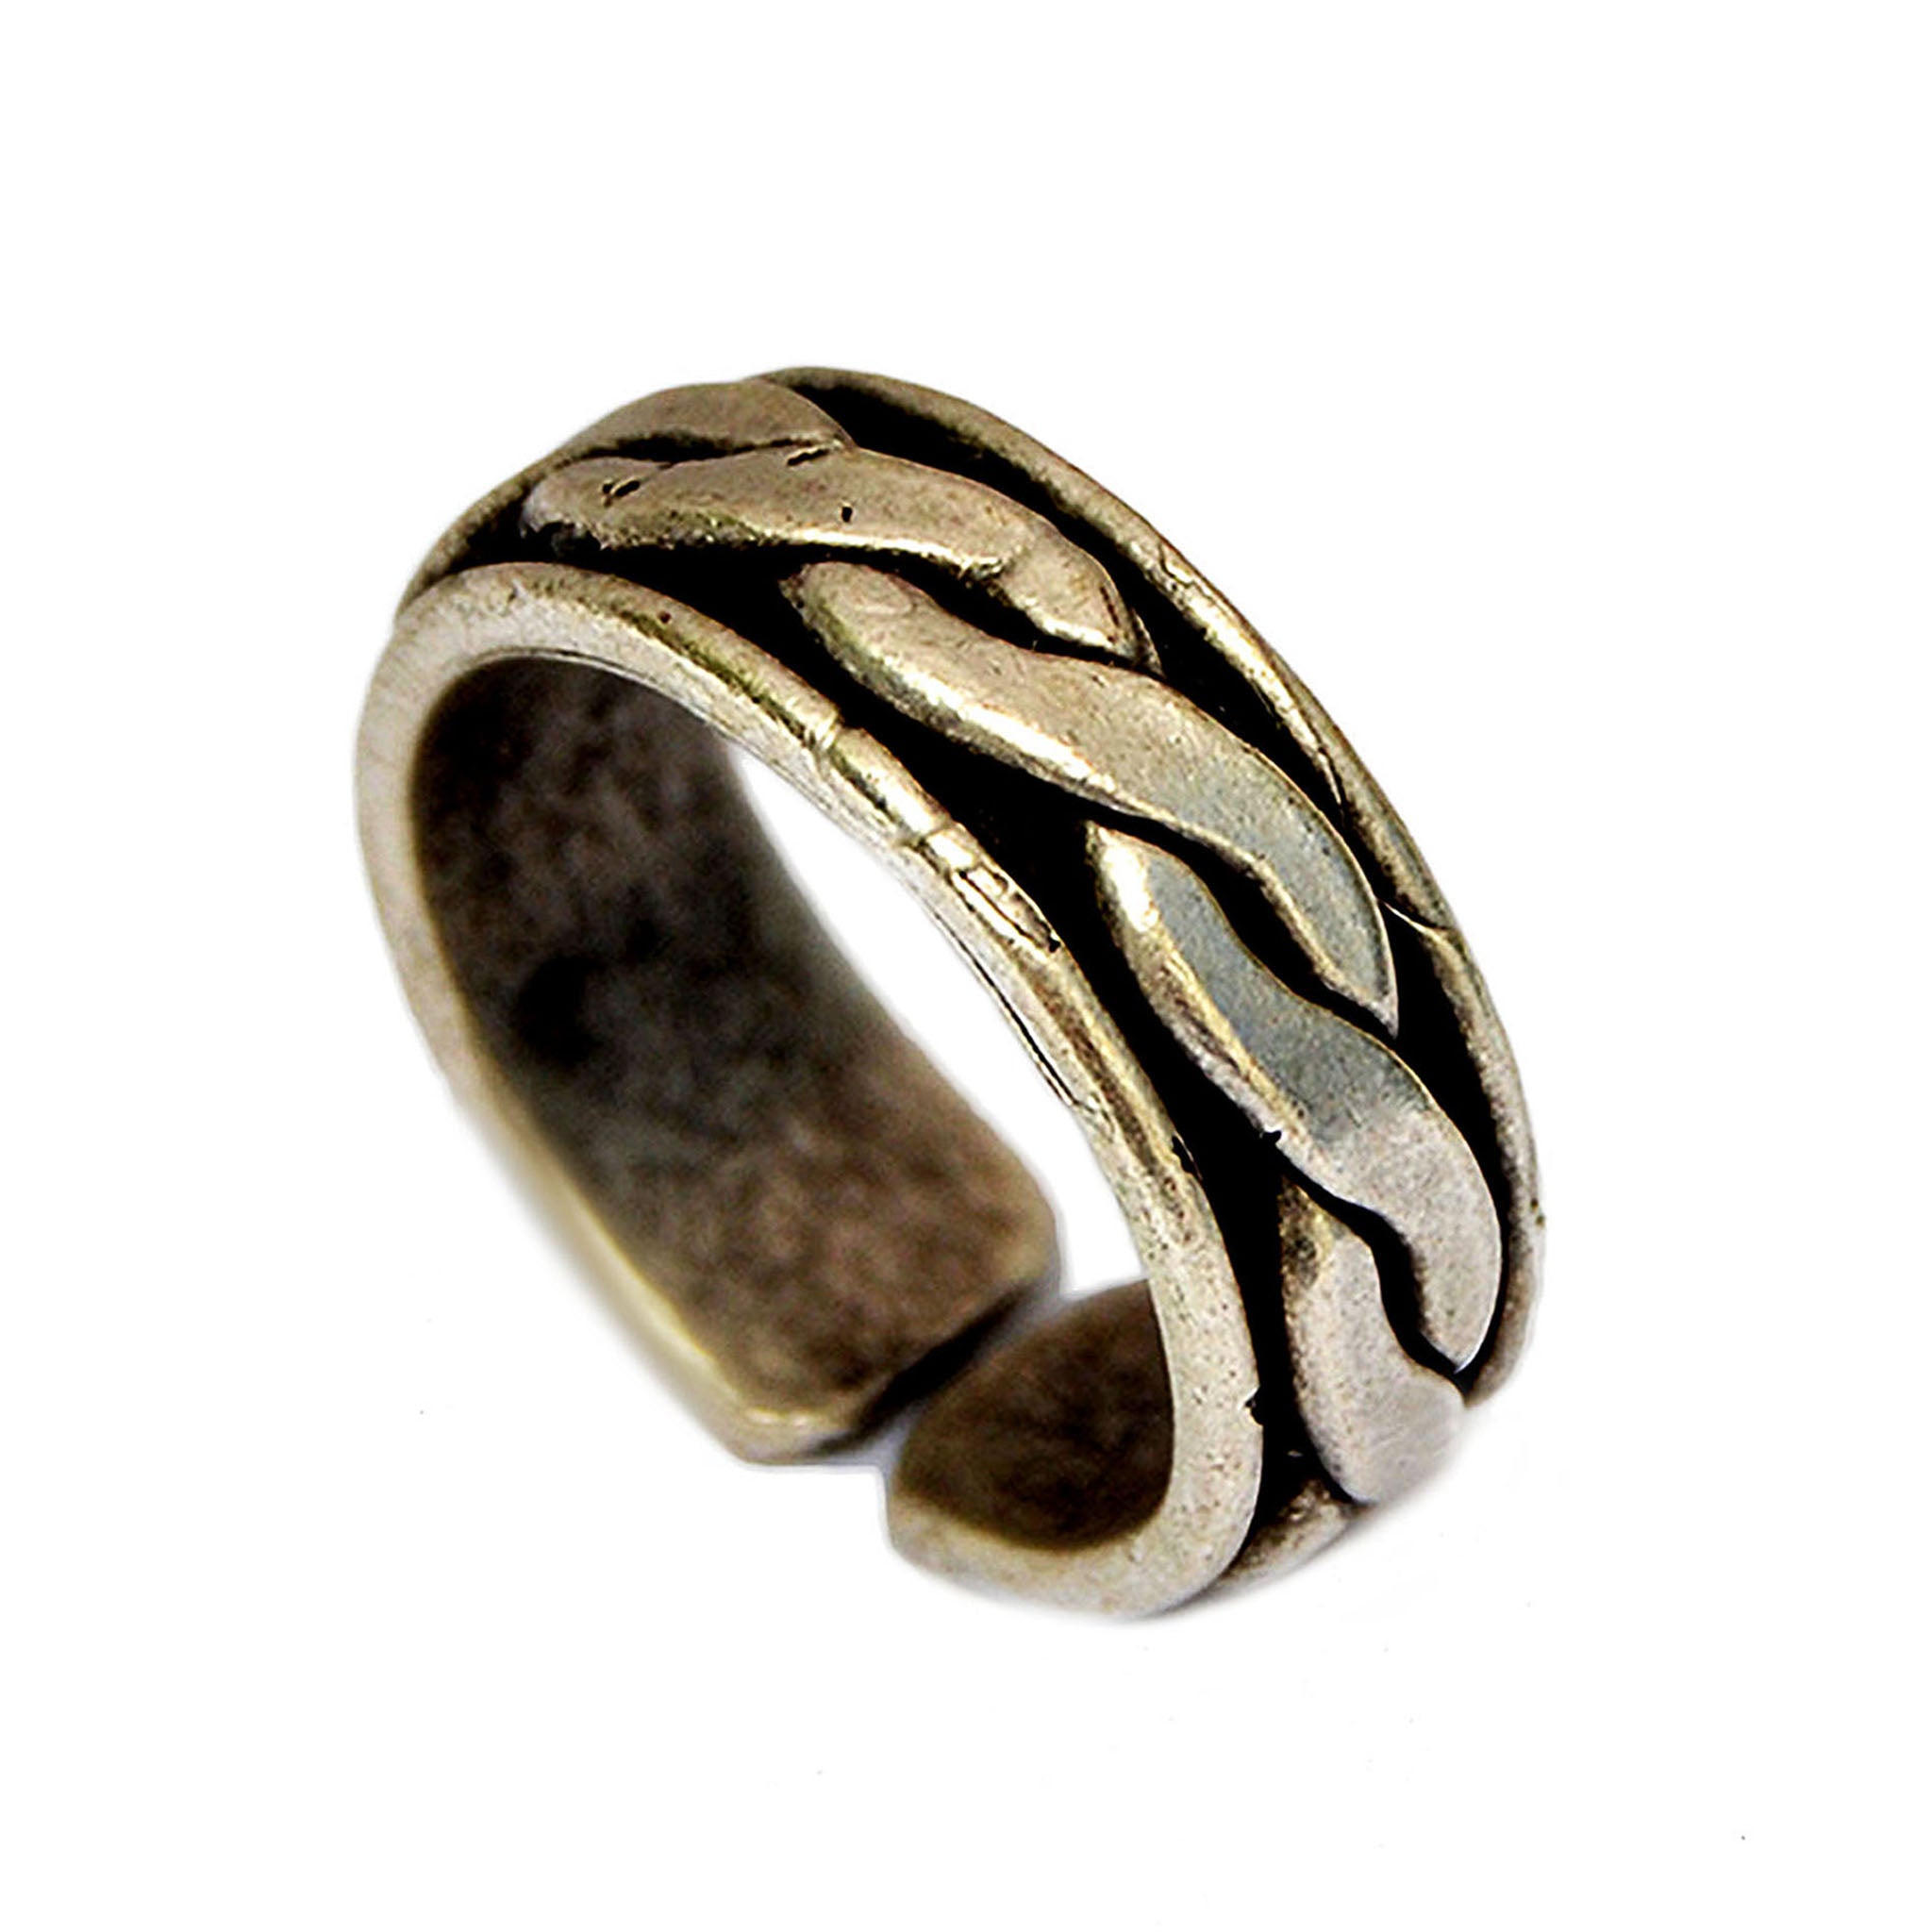 Hammered braided ring